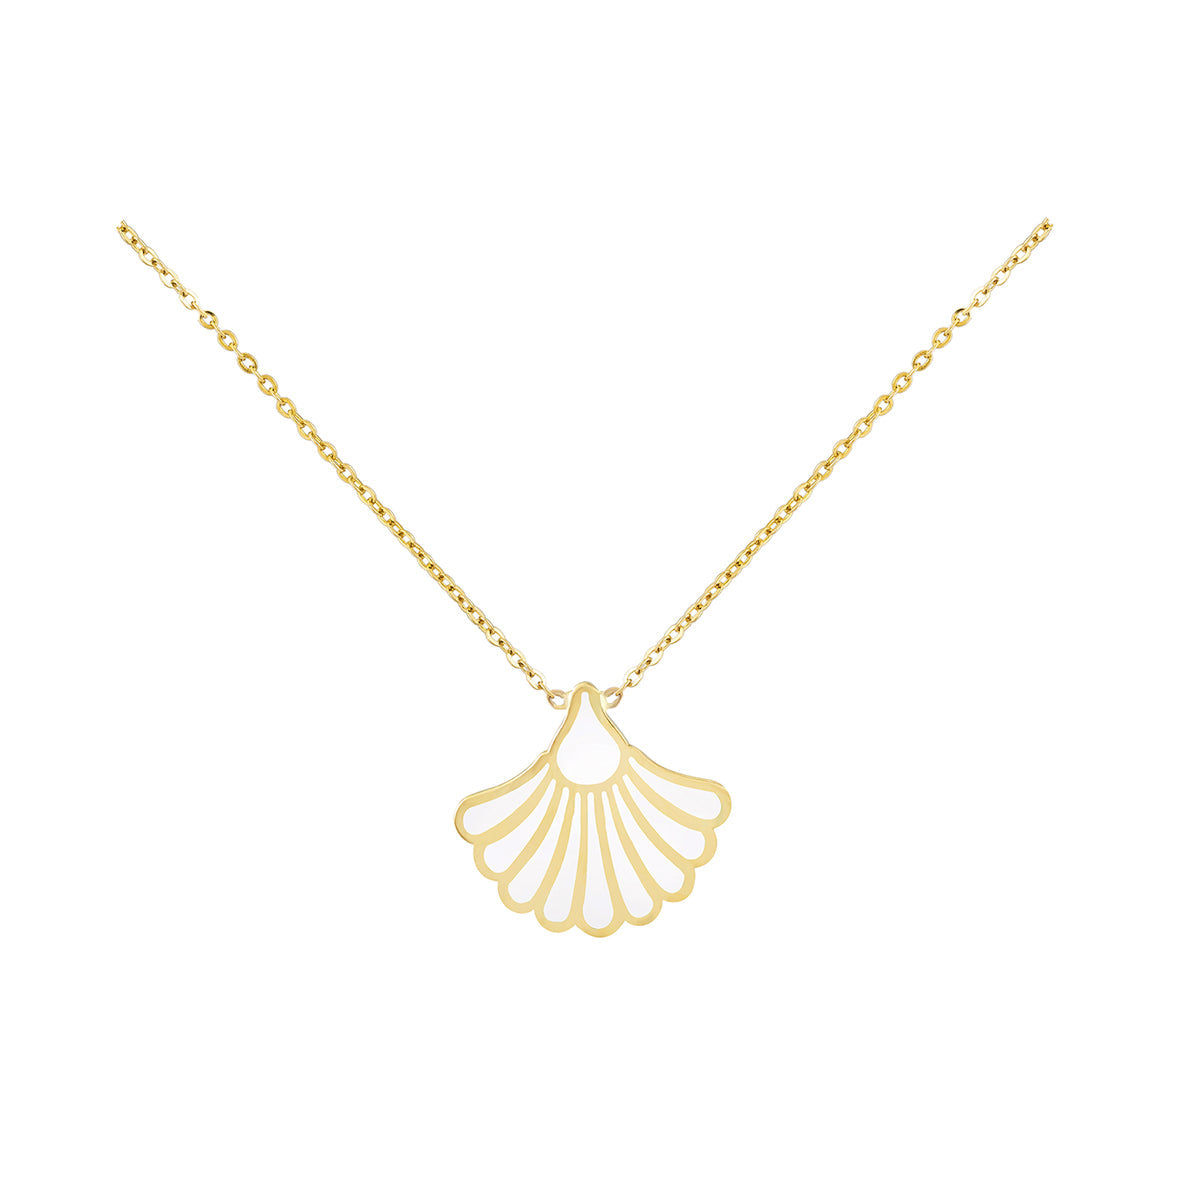 Shell Charm Necklace in 18K Yellow Gold